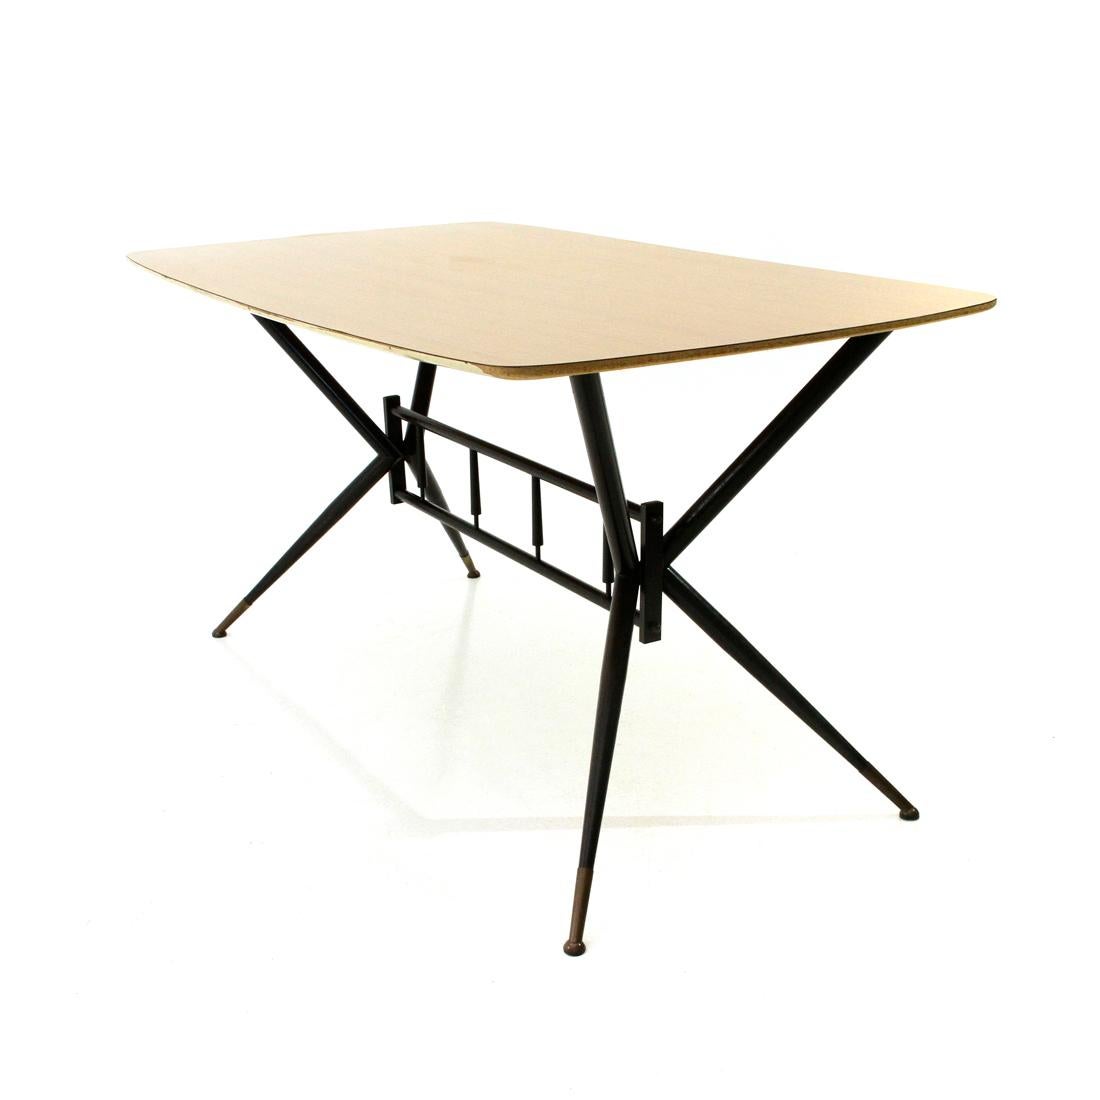 Mid-20th Century Midcentury Formica and Black Metal Dining Table, 1950s